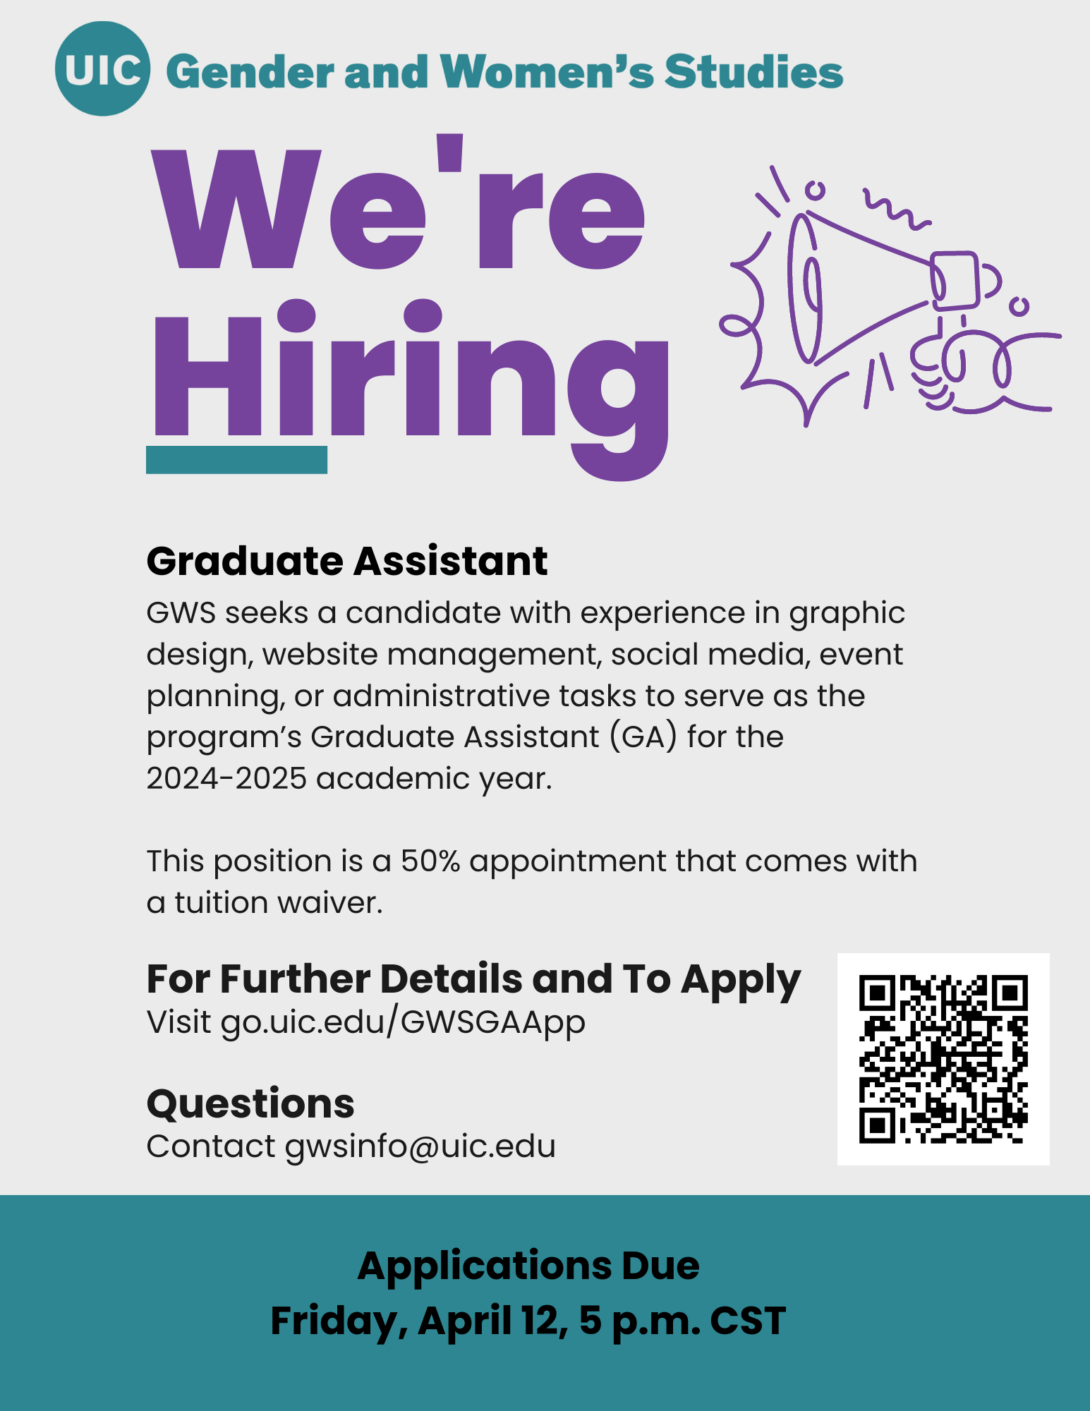 A light gray flyer with a teal border at the bottom announces GWS's hiring of a Graduate Assistant in purple and black text. The GWS logo appears in teal across the top of the flyer. A drawing of a hand holding a megaphone in purple appears in the top right, next to big bold purple text that states We're Hiring.